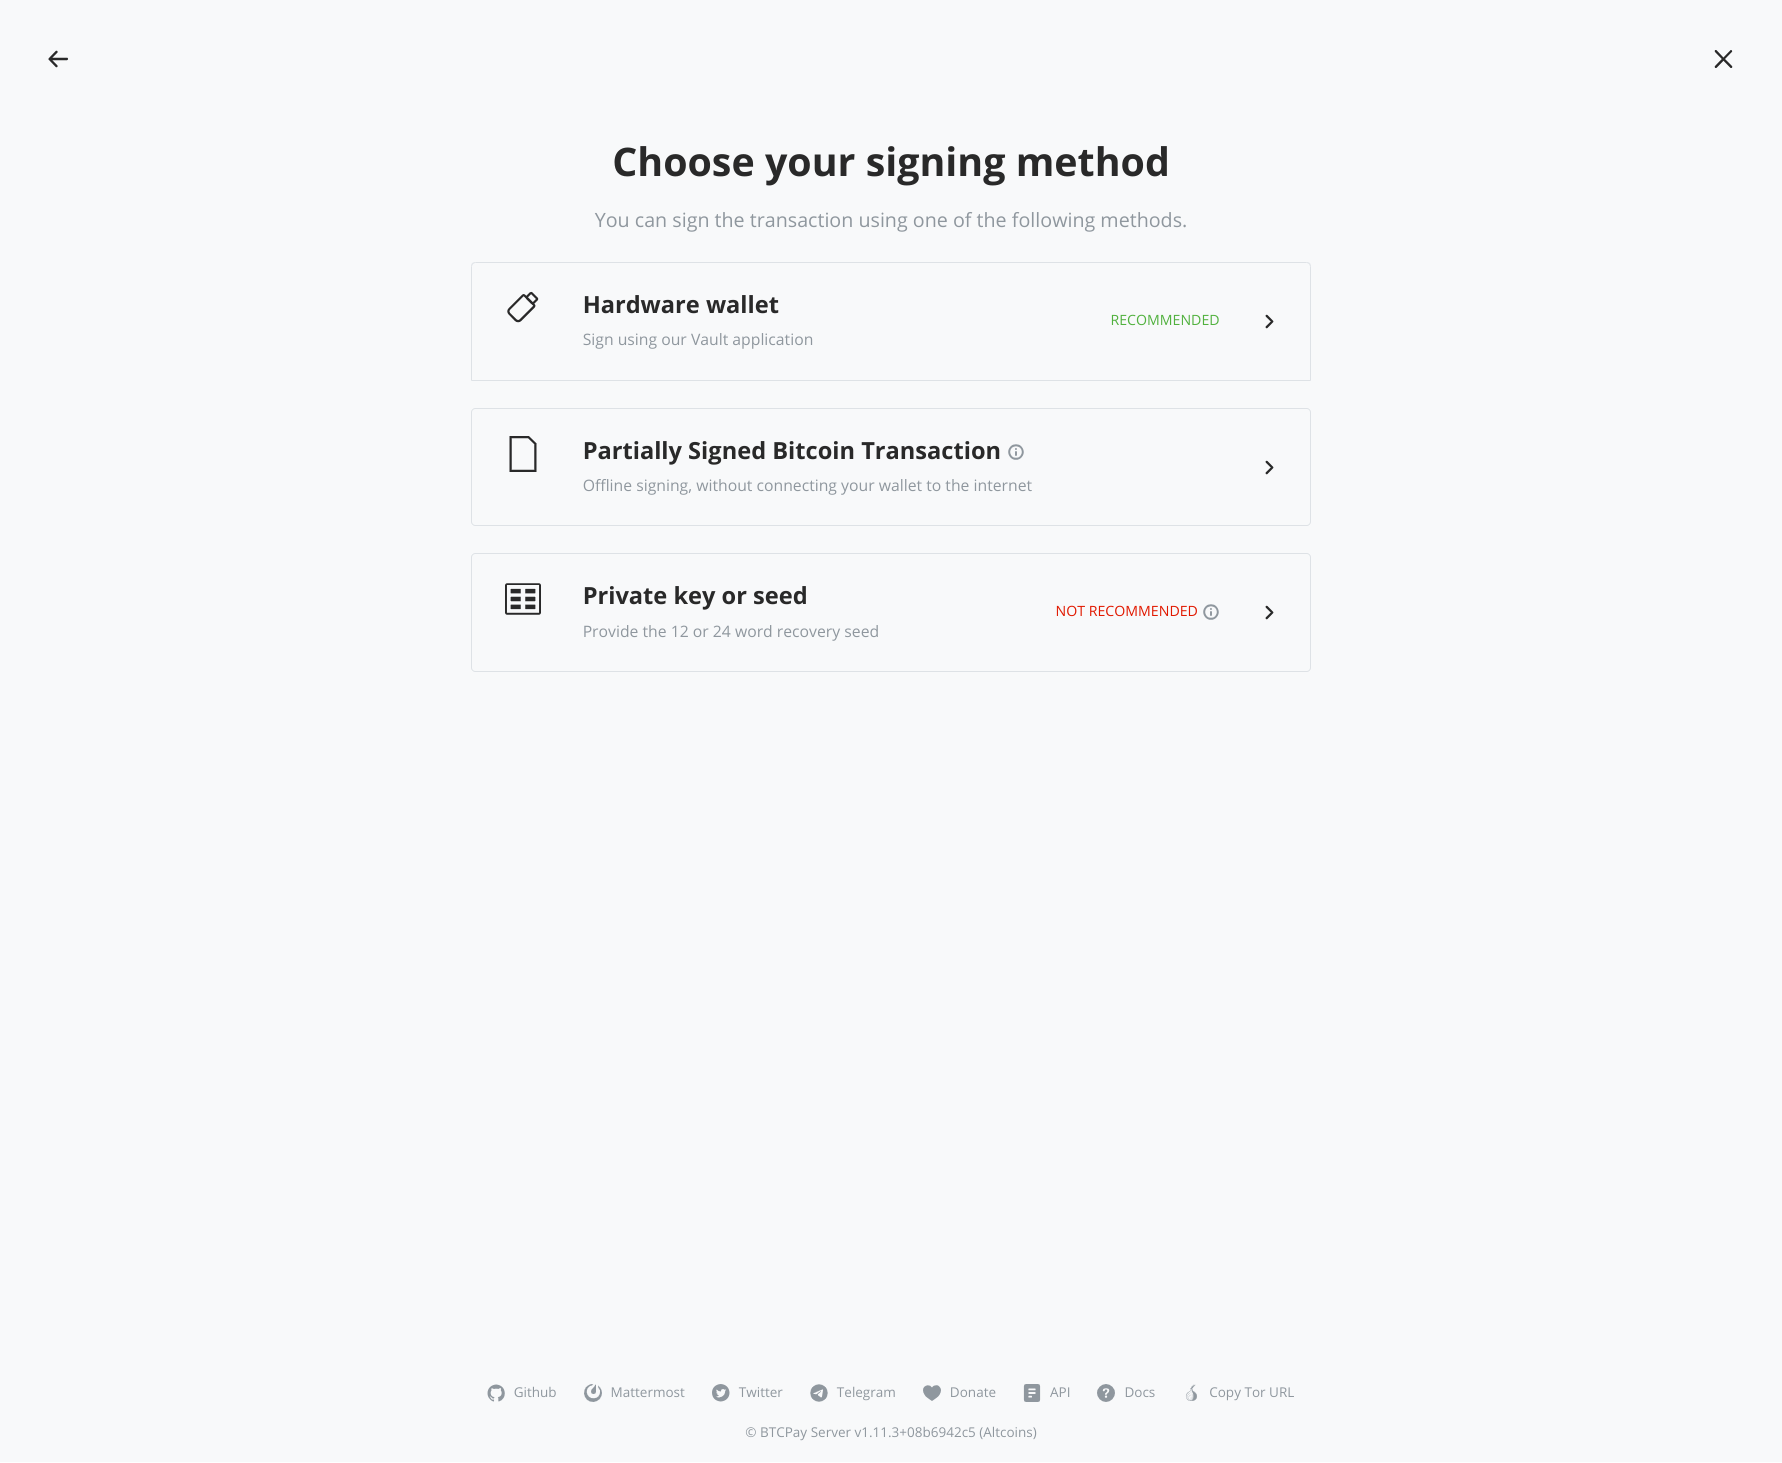 BTCPay: Choose signing method: Partially Signed Bitcoin Transaction